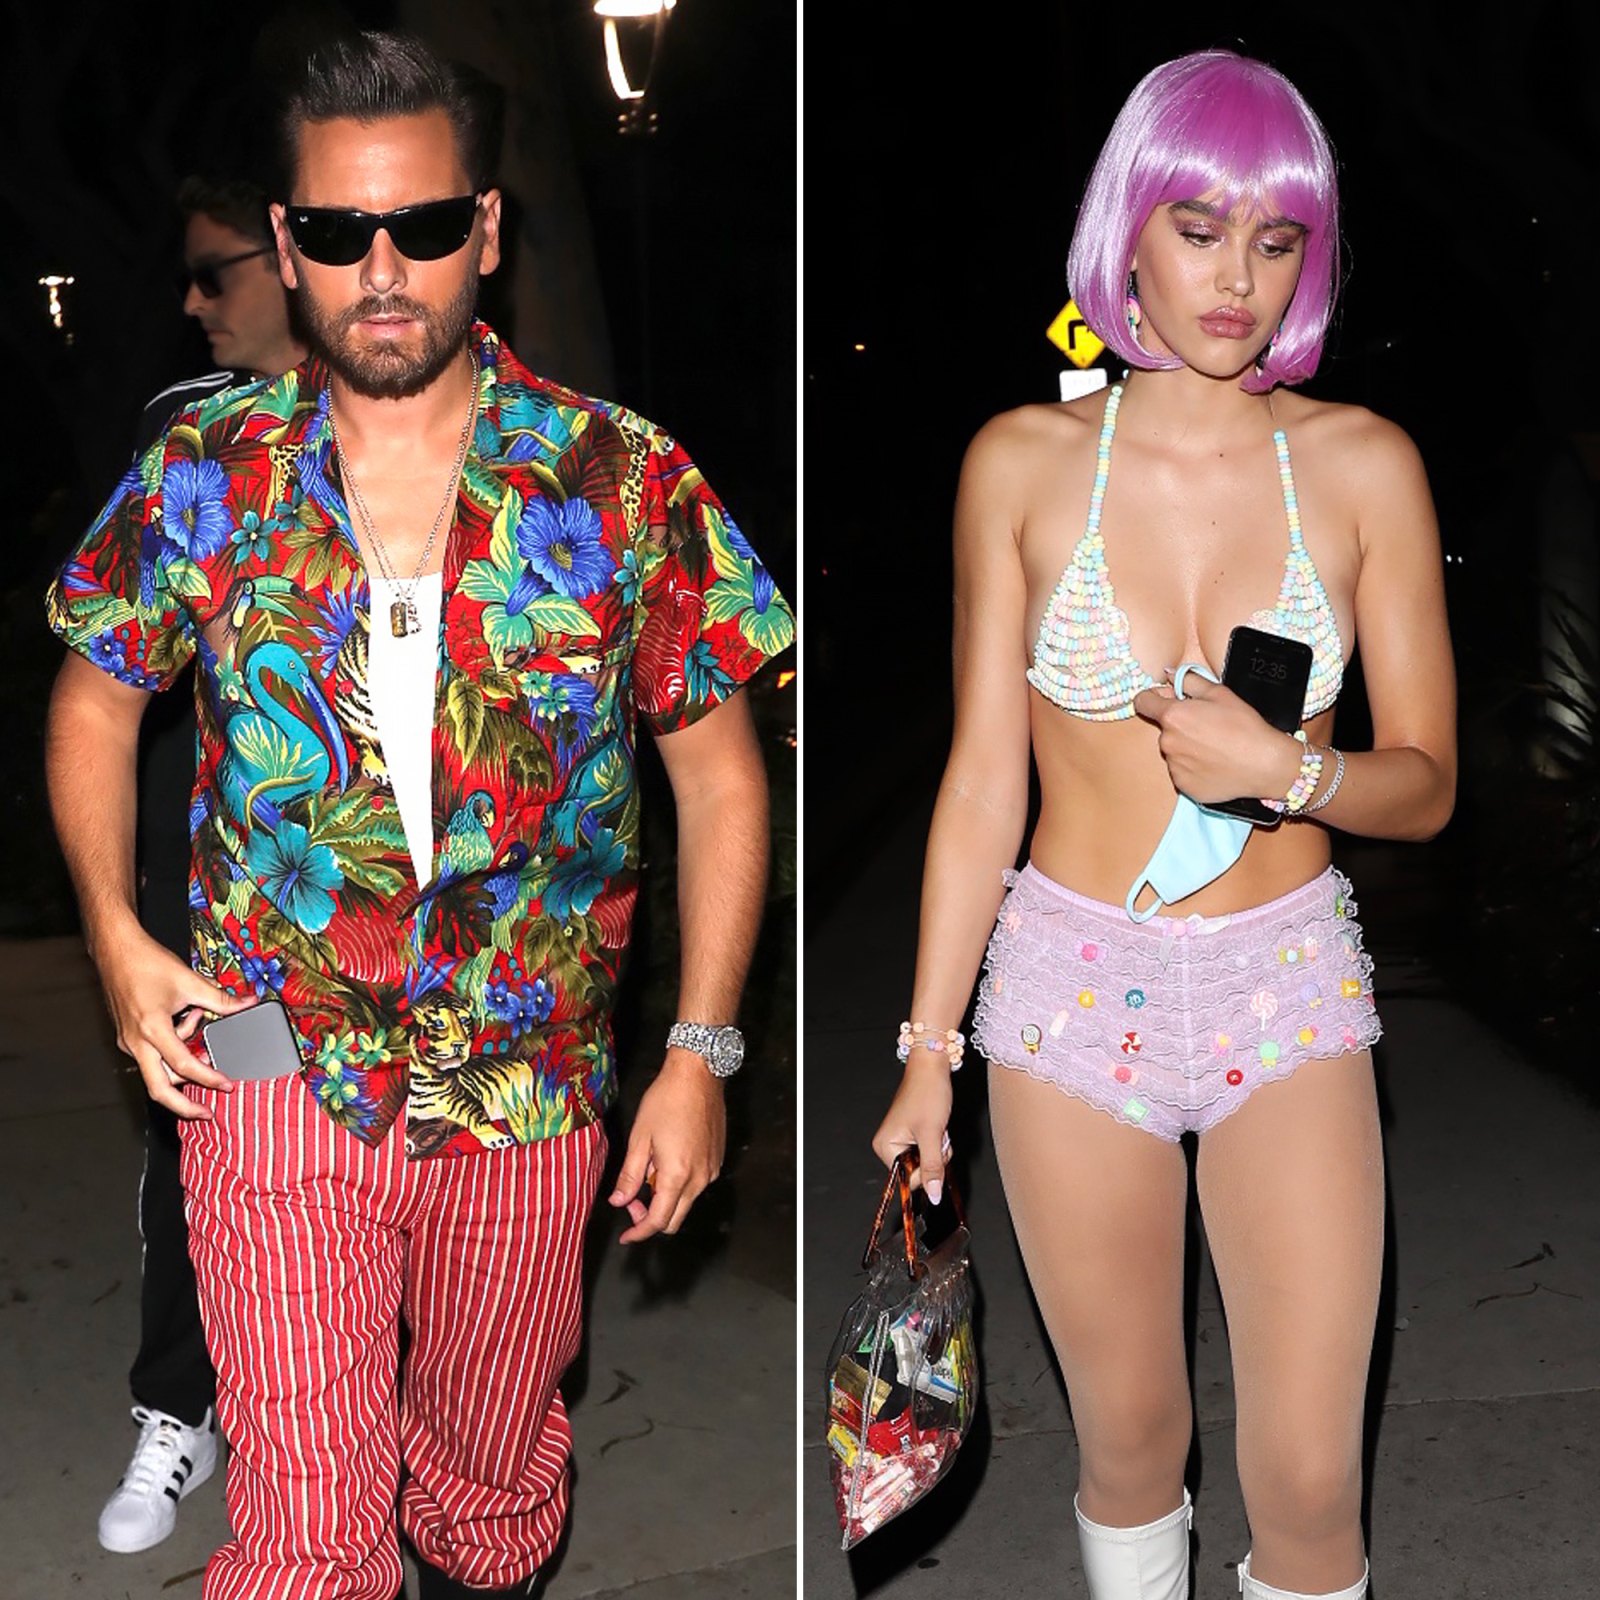 1 Scott-Disick-Attends-Halloween-Party-With-Amelia-Hamlin-After-Cozy-Pics-With-Kourtney-Kardashian-Feature